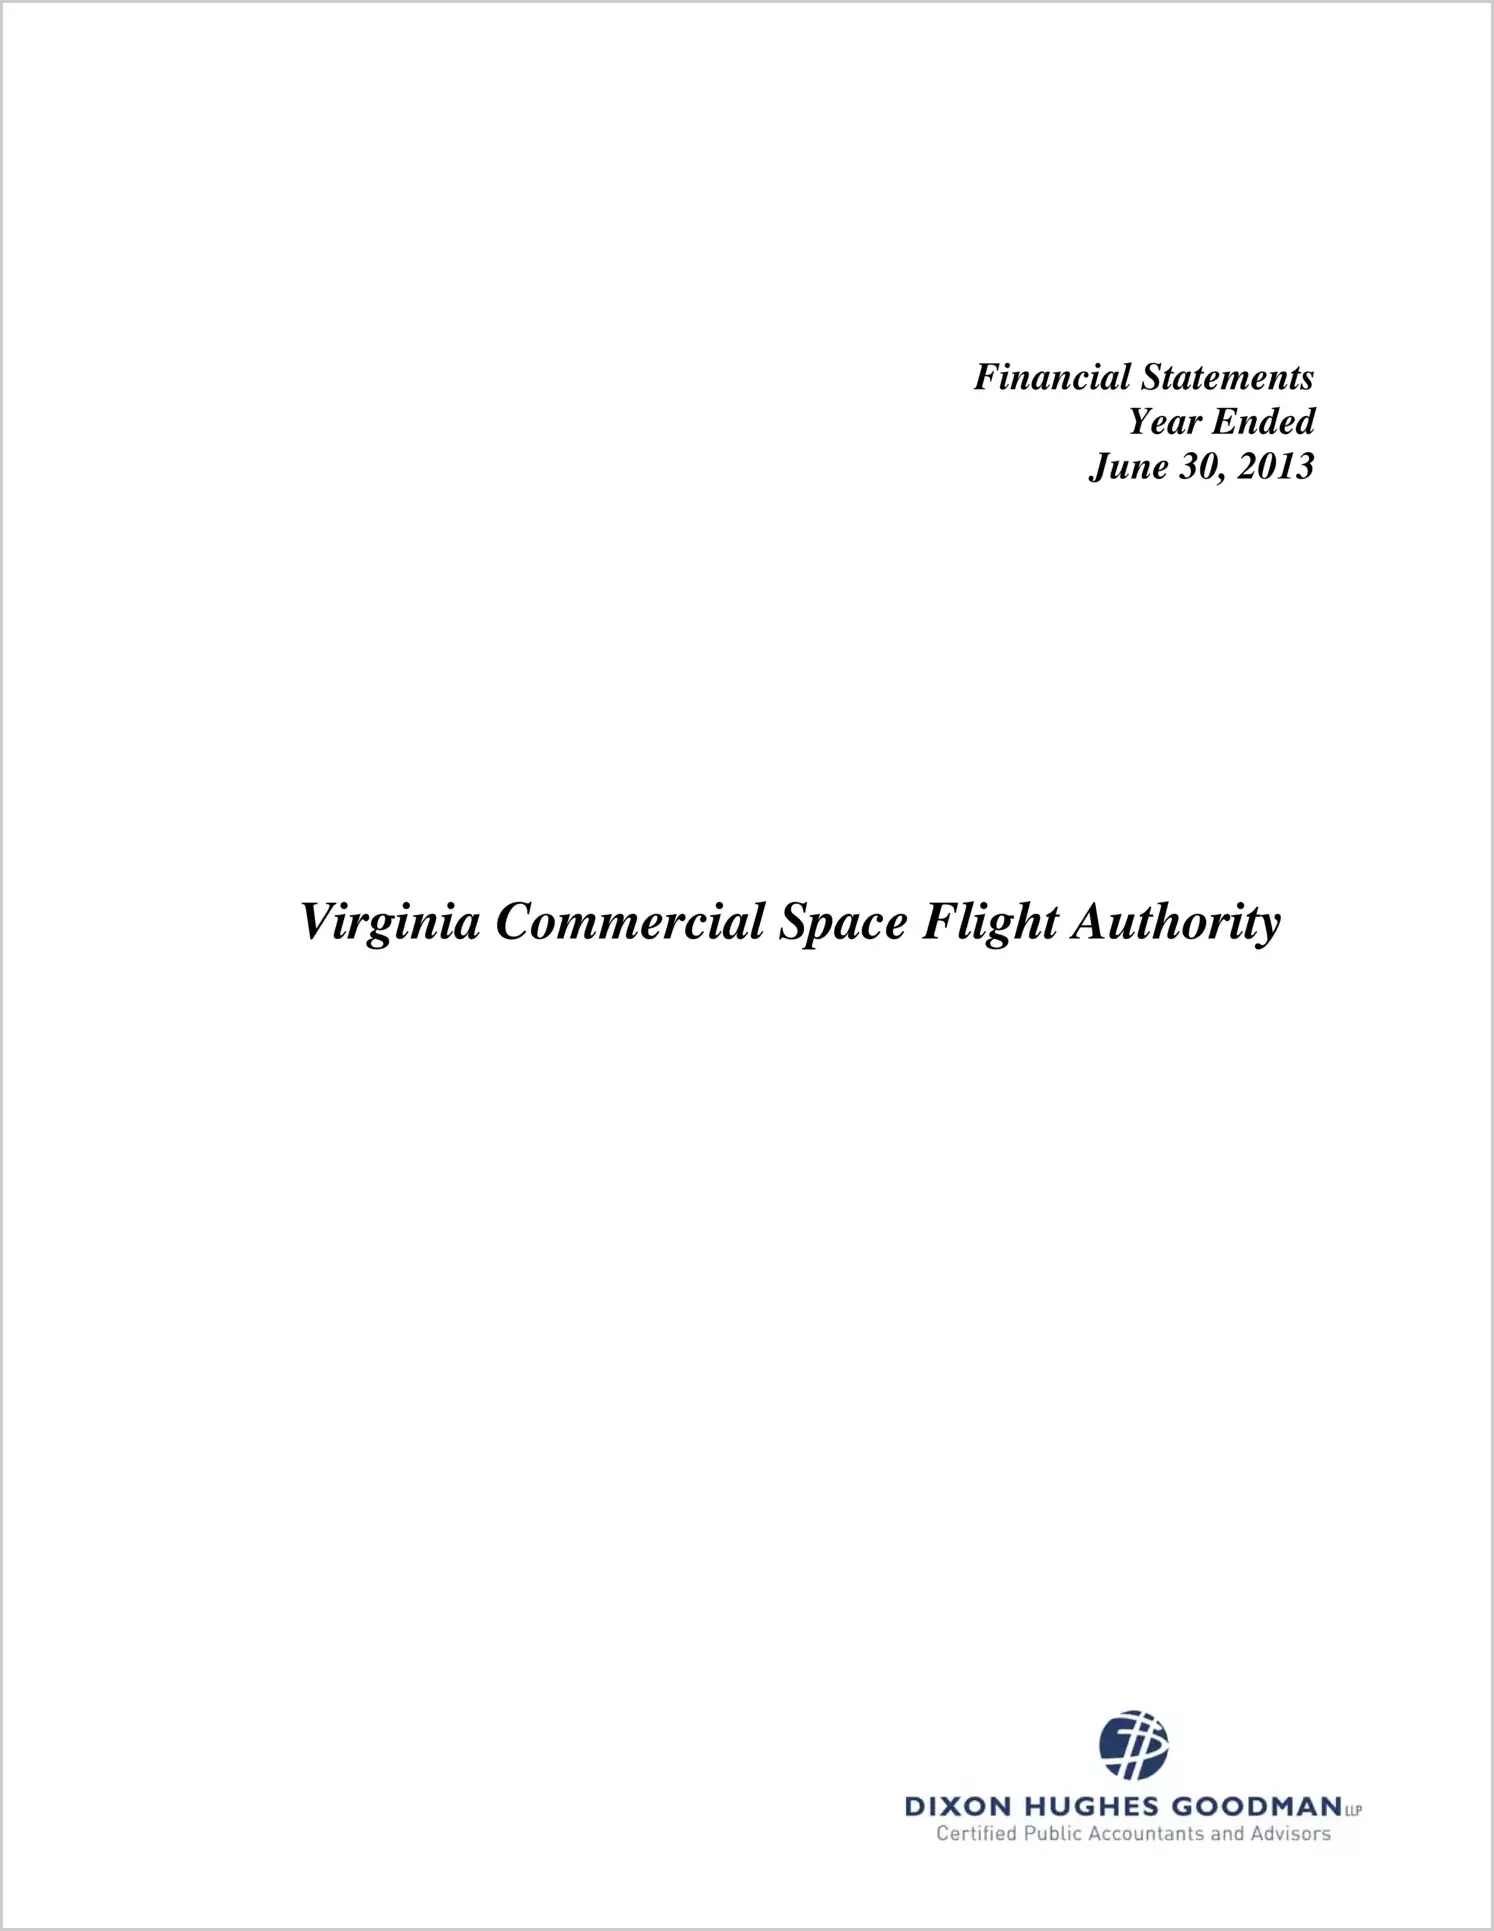 Virginia Commercial Space Flight Authority Financial Statements for the year ended June 30, 2013